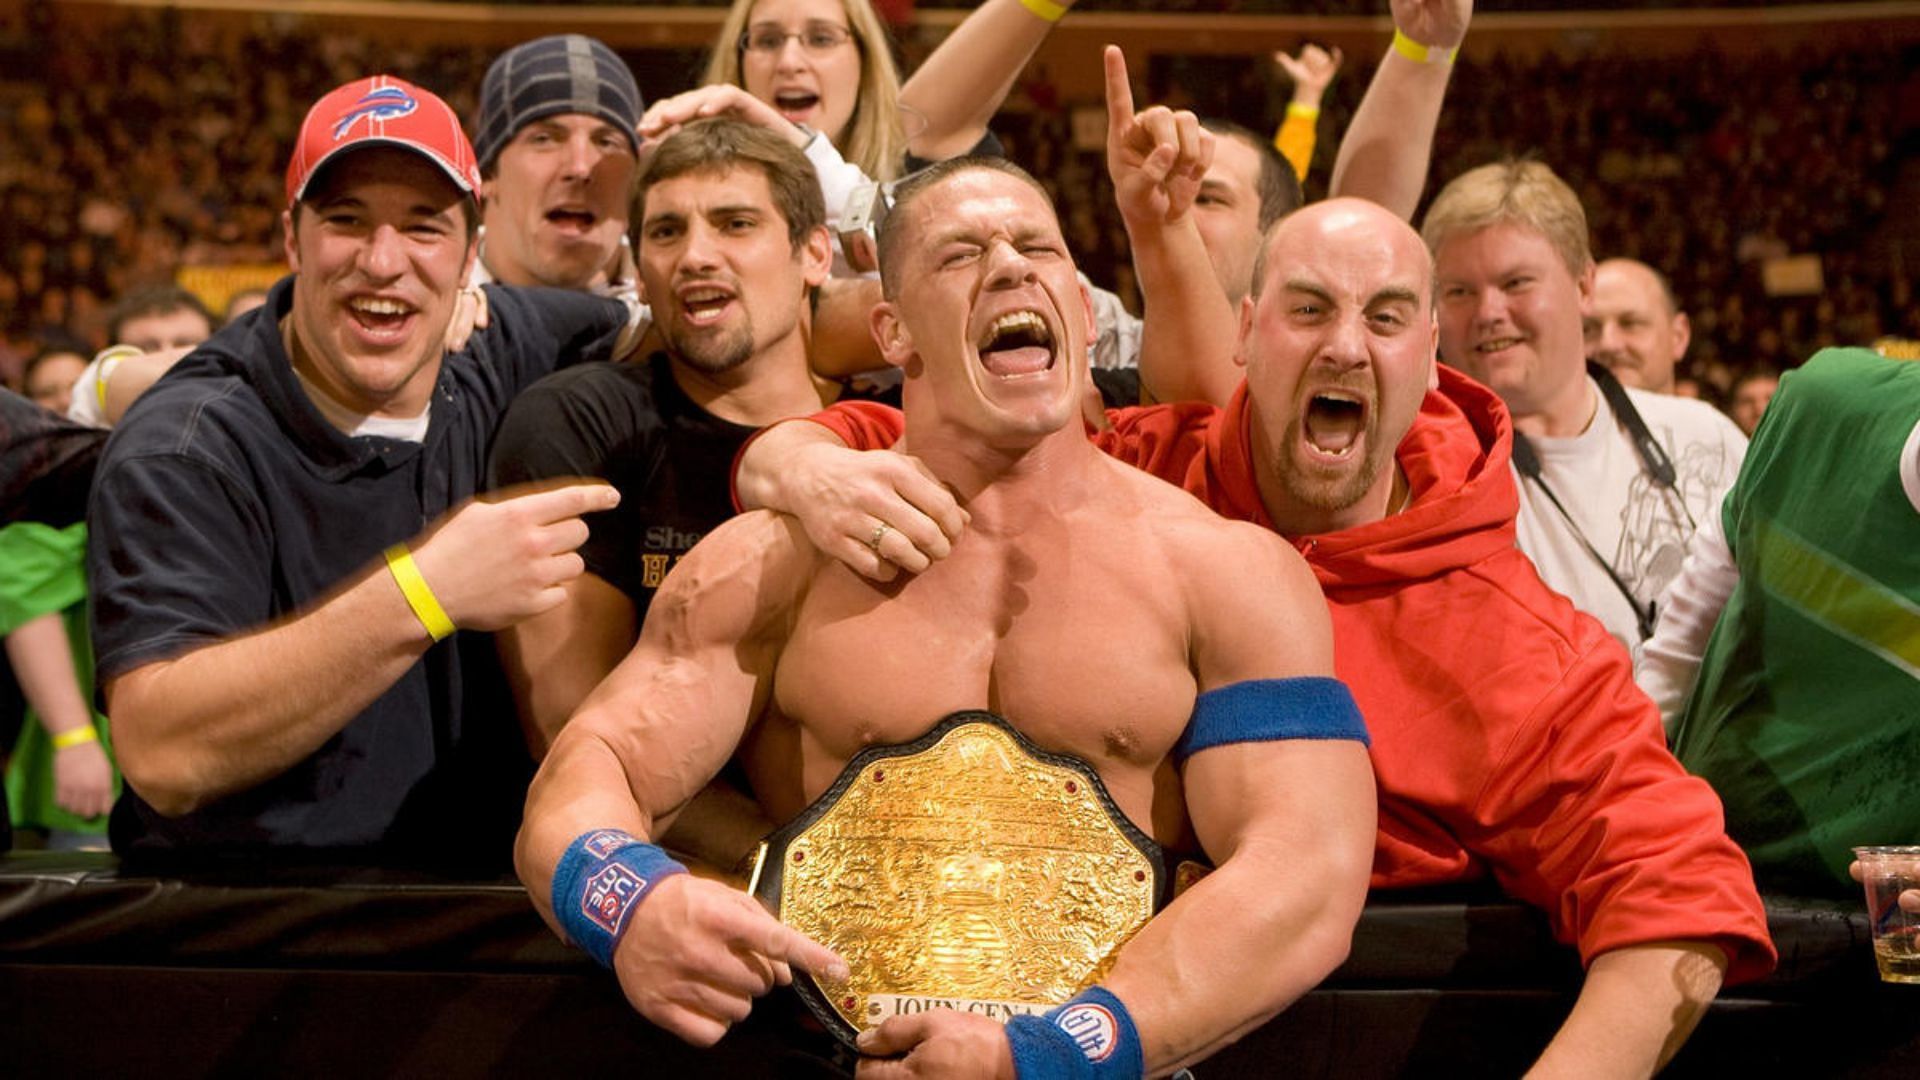 John Cena is one of the most decorated superstars in WWE history